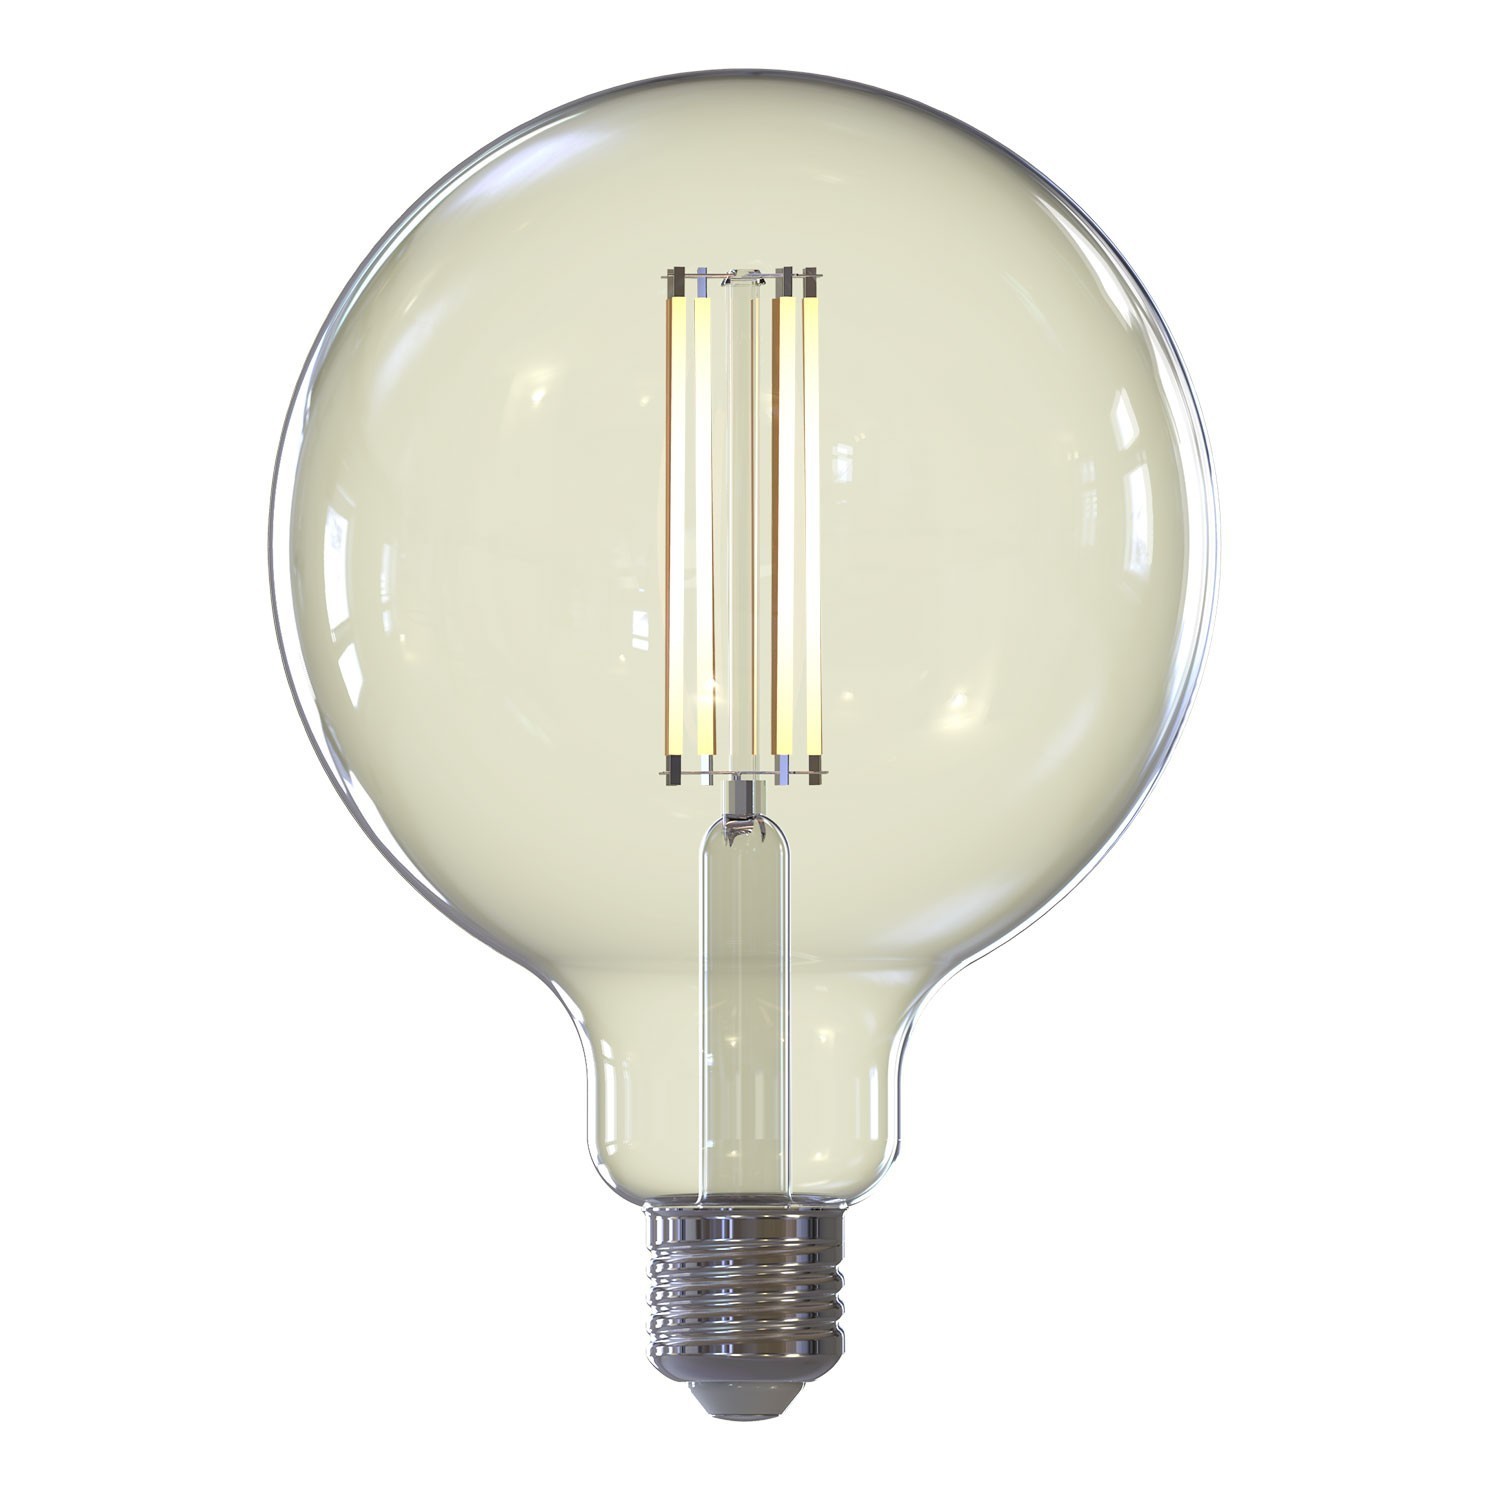 LED SMART WI-FI Light Bulb Globe G125 Transparent with Filament 7W 806Lm E27 2700K Dimmable